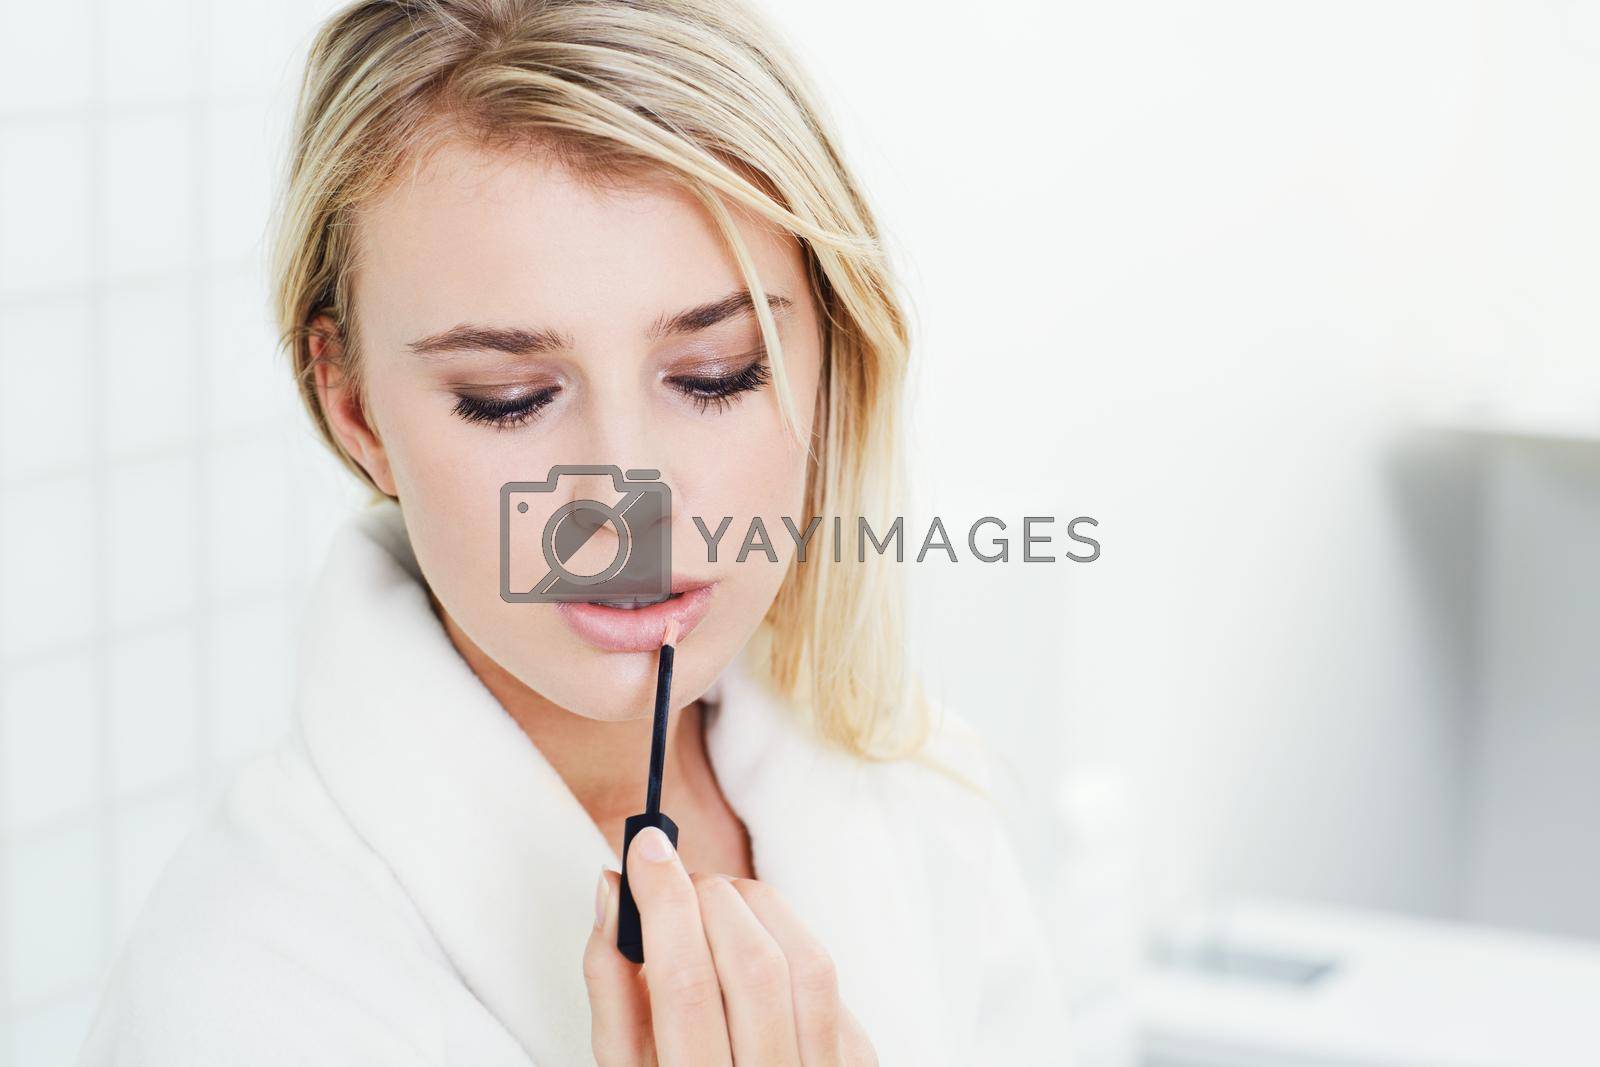 Royalty free image of Hell want to kiss her with this lipgloss. A beautiful young woman applying lipgloss. by YuriArcurs